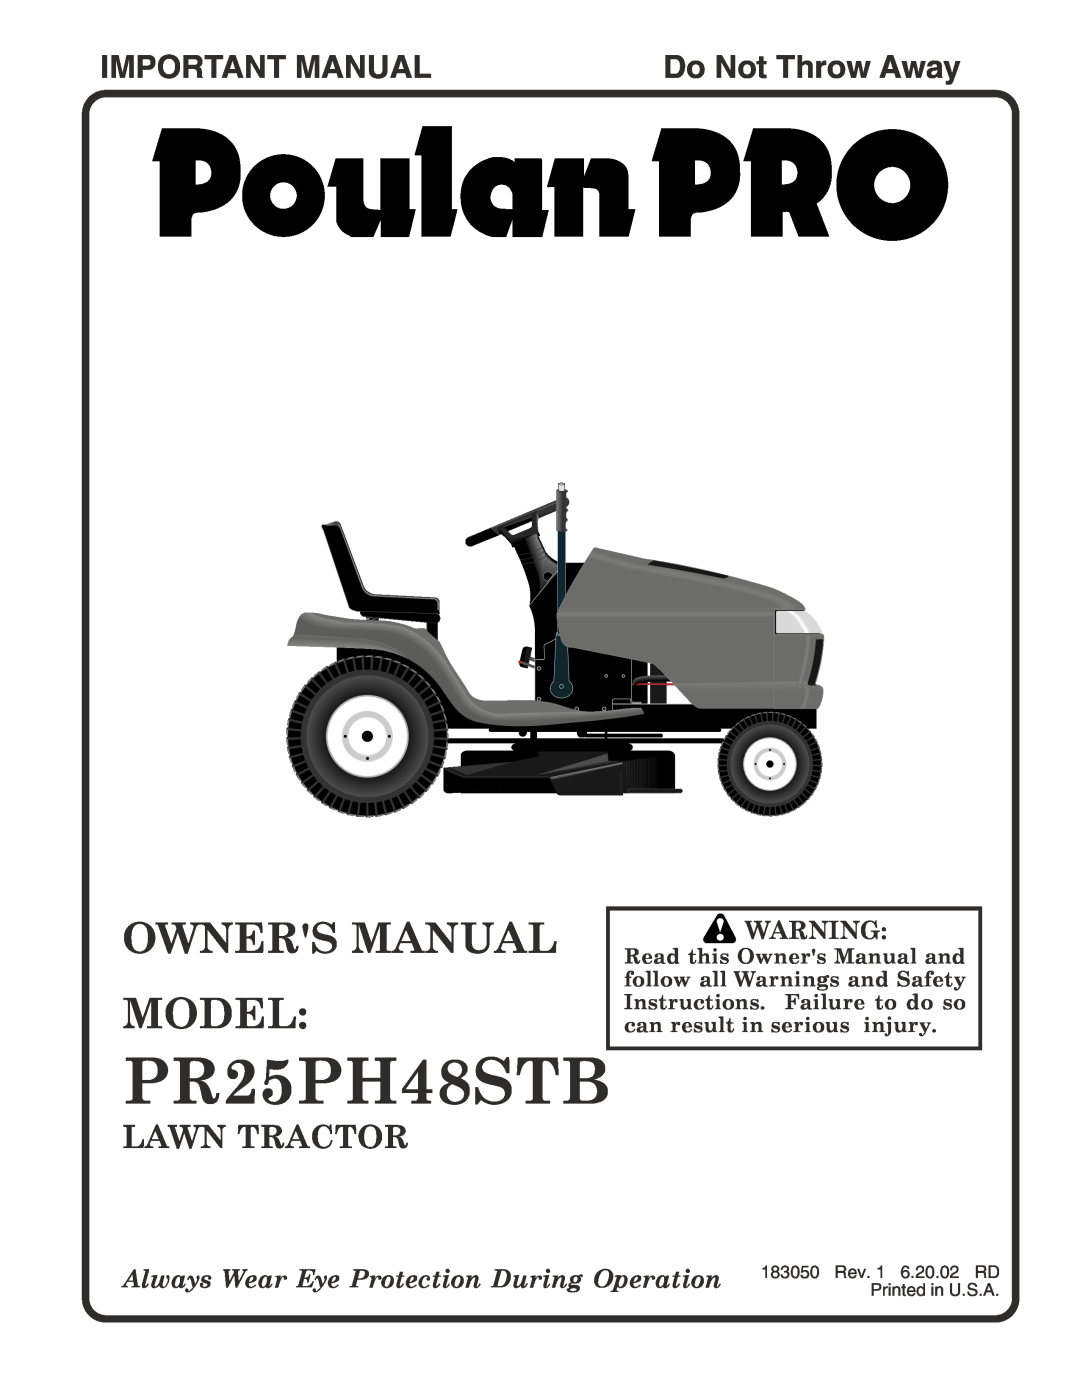 Poulan 183050 owner manual Important Manual, Do Not Throw Away, PR25PH48STB, Lawn Tractor 